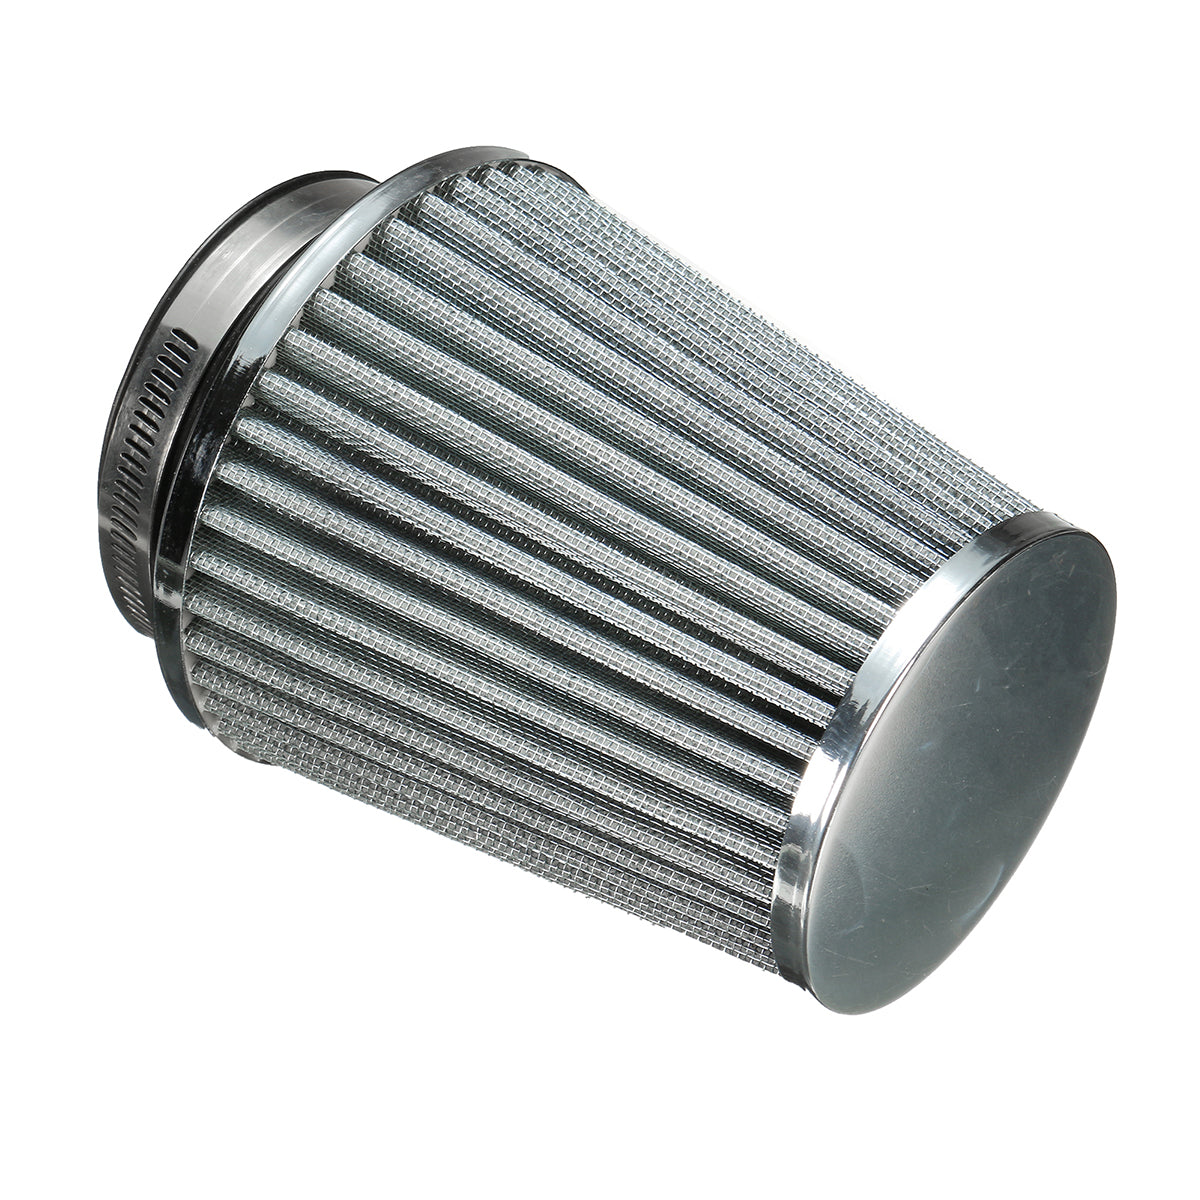 3Inch 75mm Car Air Filter Clean Intake High Flow Short RAM/COLD Round Cone Heavy Metal Alloy - Auto GoShop